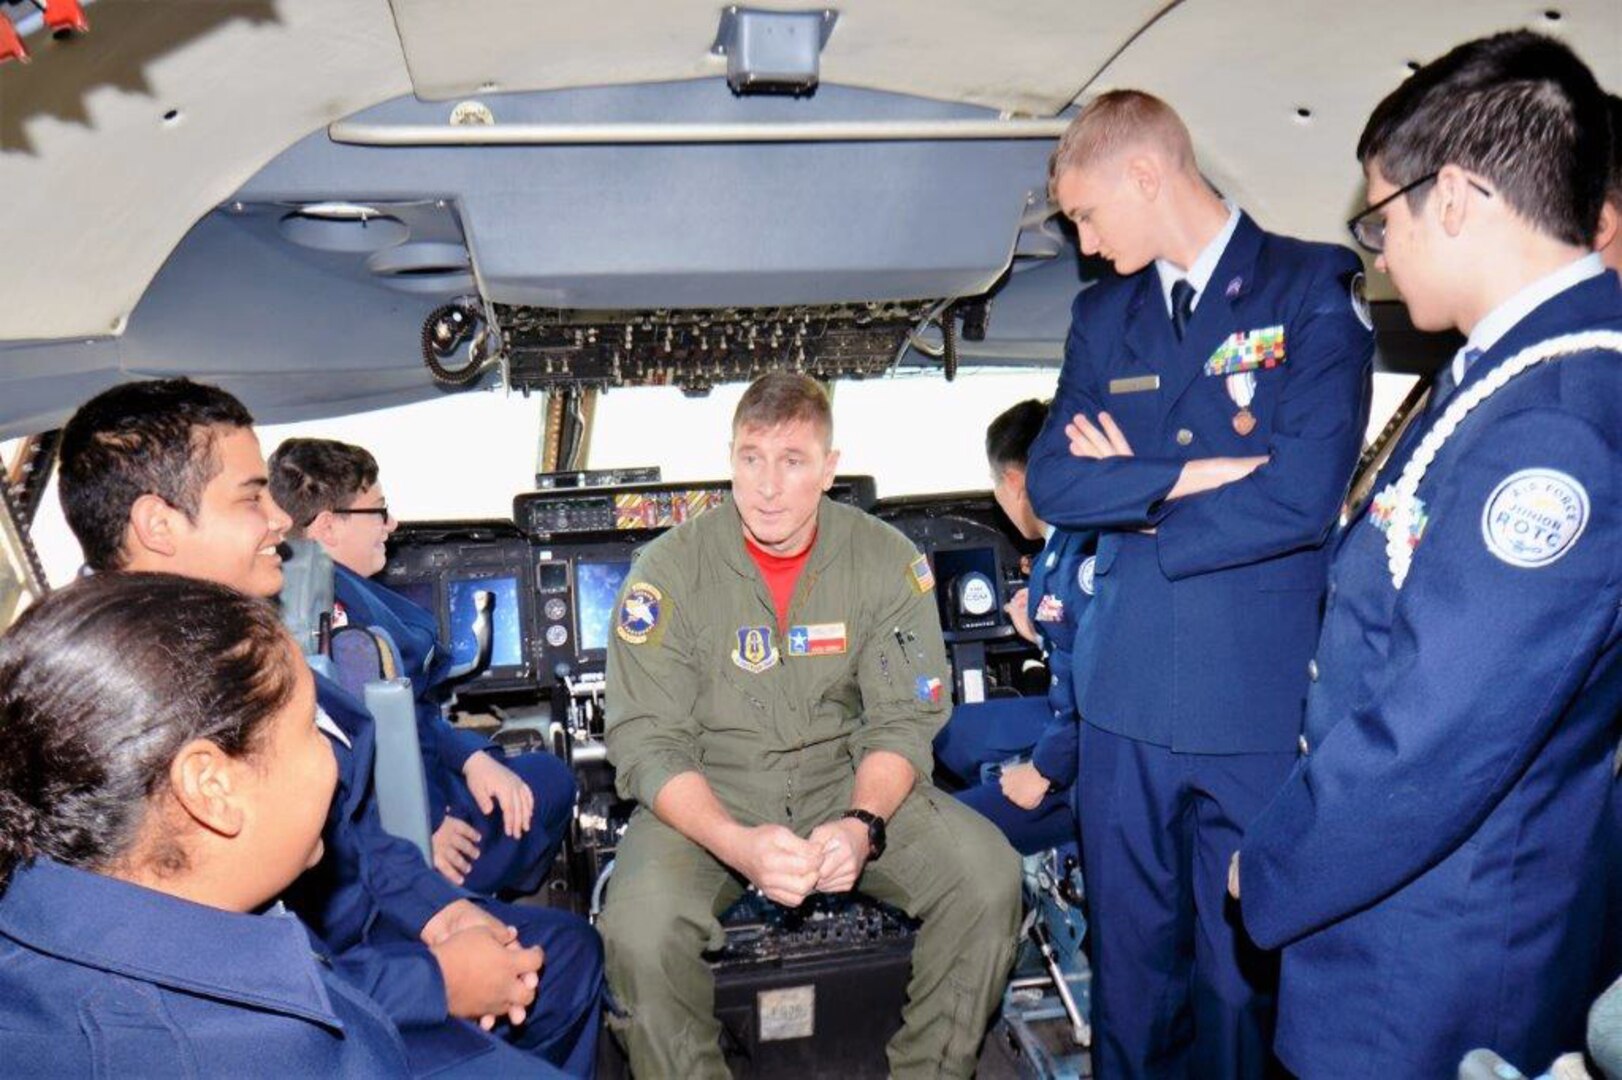 Flight Engineer Tech. Sgt. Ryan Lohrer with the 68th Airlift Squadron, Joint Base San Antonio-Lackland, seated center in the new upgraded C-5M Super Galaxy, Nov. 16, 2018, explains the different controls located in the cockpit to Porter High School Air Force Junior Reserve Officers’ Training Corps cadets.